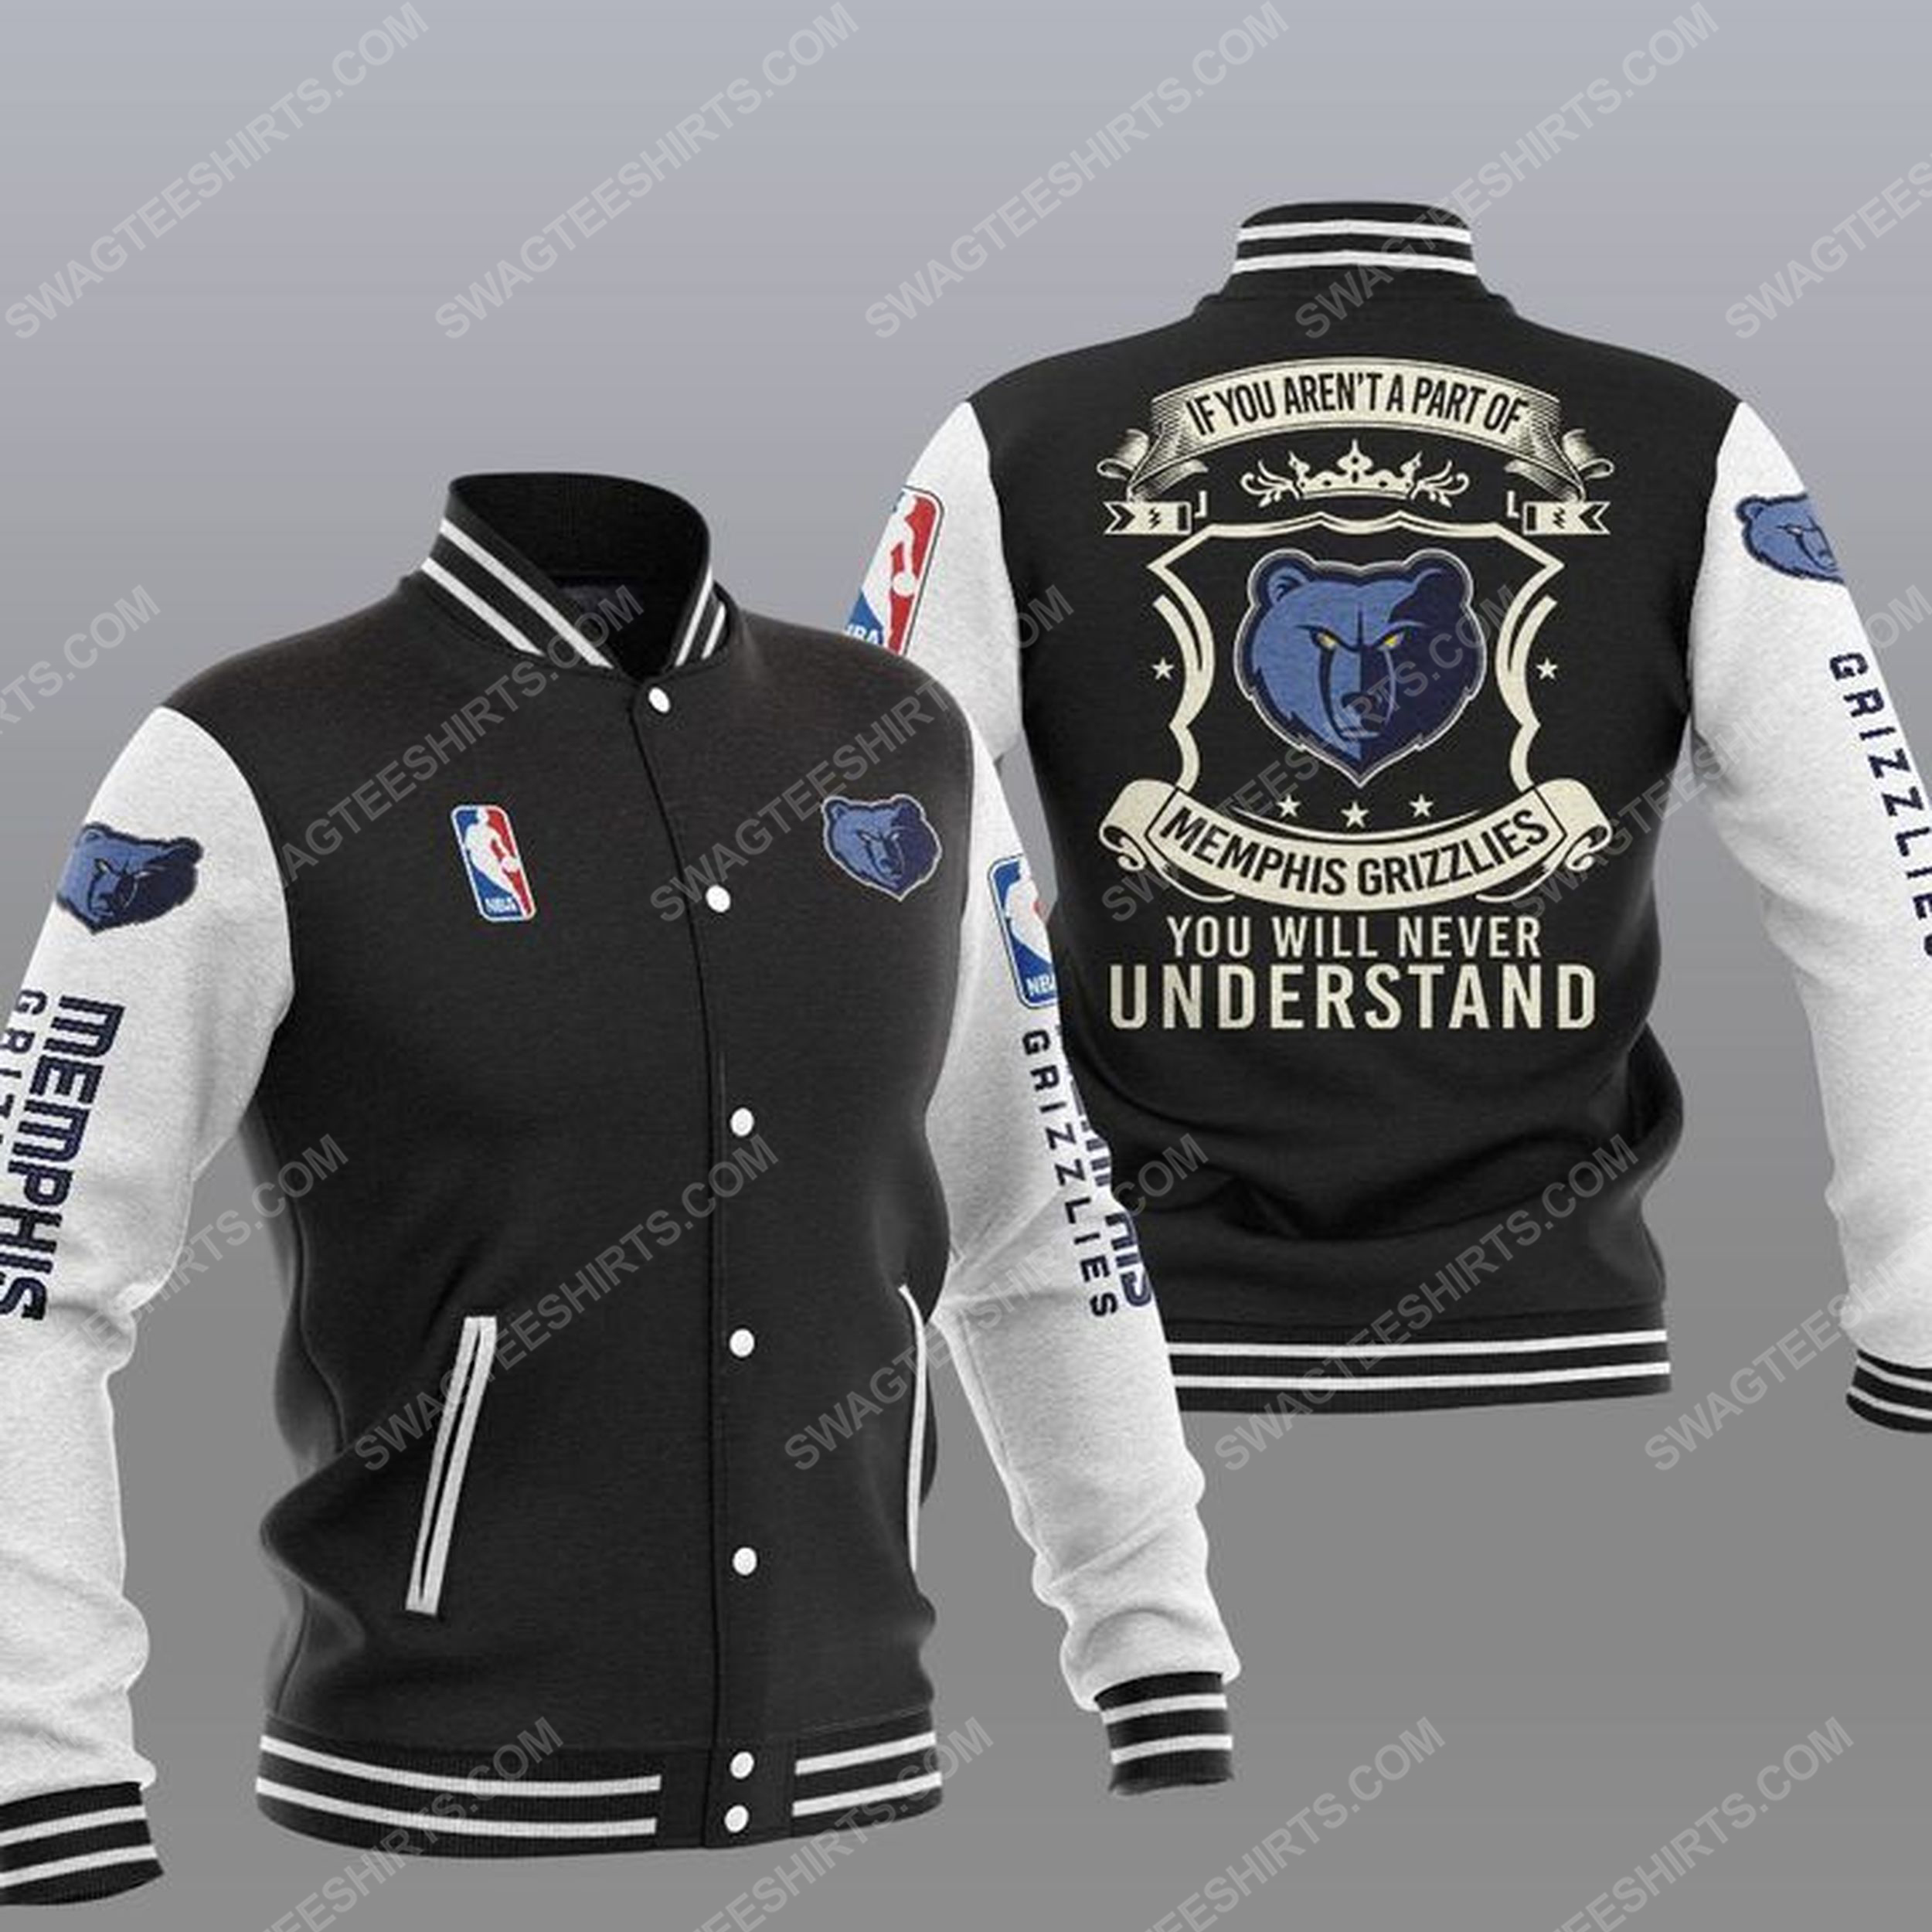 You will never understand memphis grizzlies all over print baseball jacket - black 1